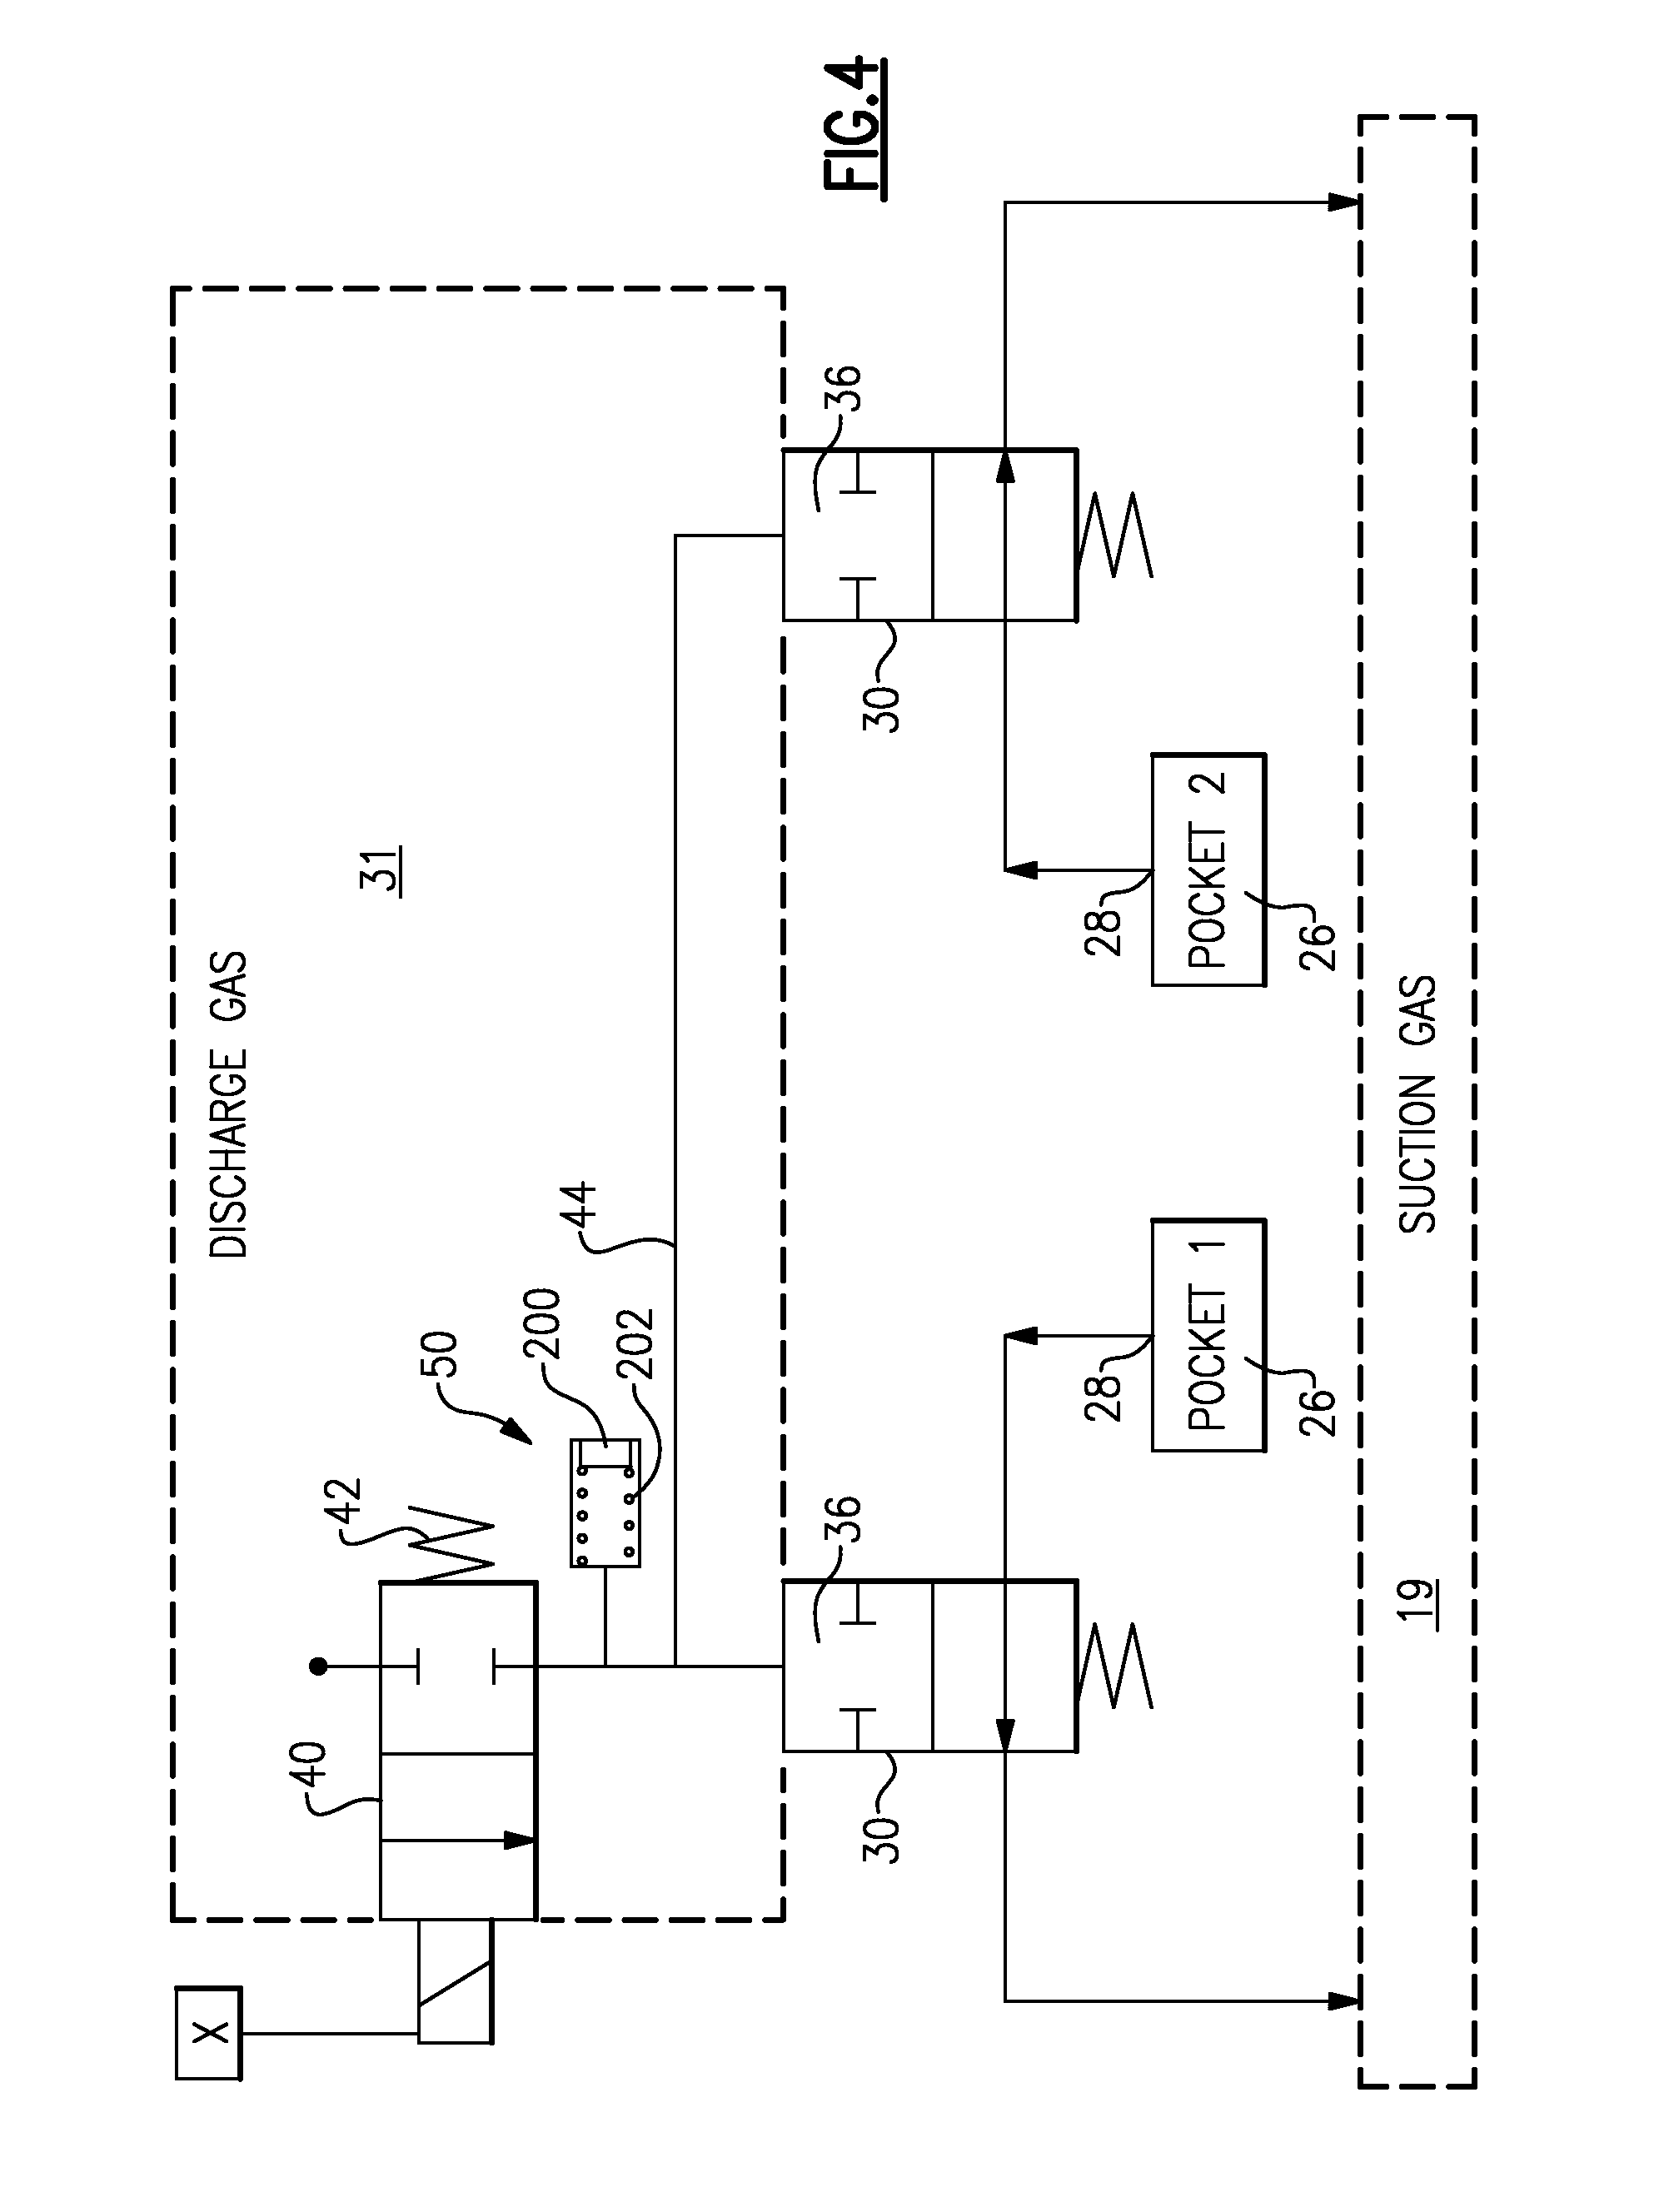 Scroll compressor capacity modulation with hybrid solenoid and fluid control